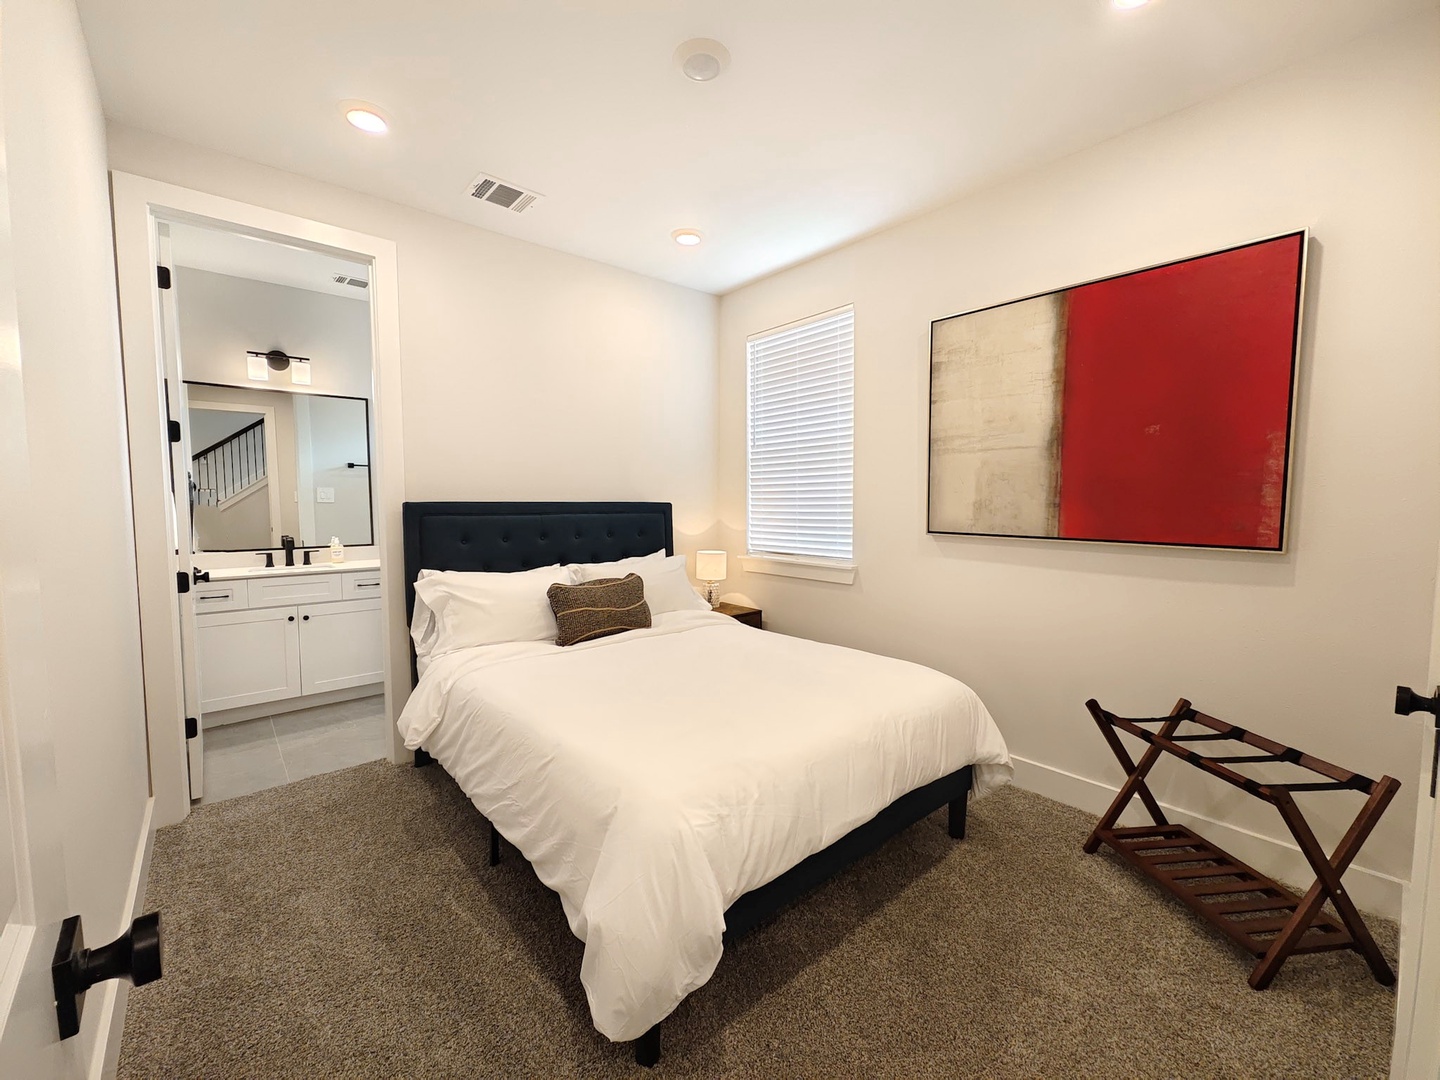 The 1st-floor suite features a plush queen bed & private ensuite